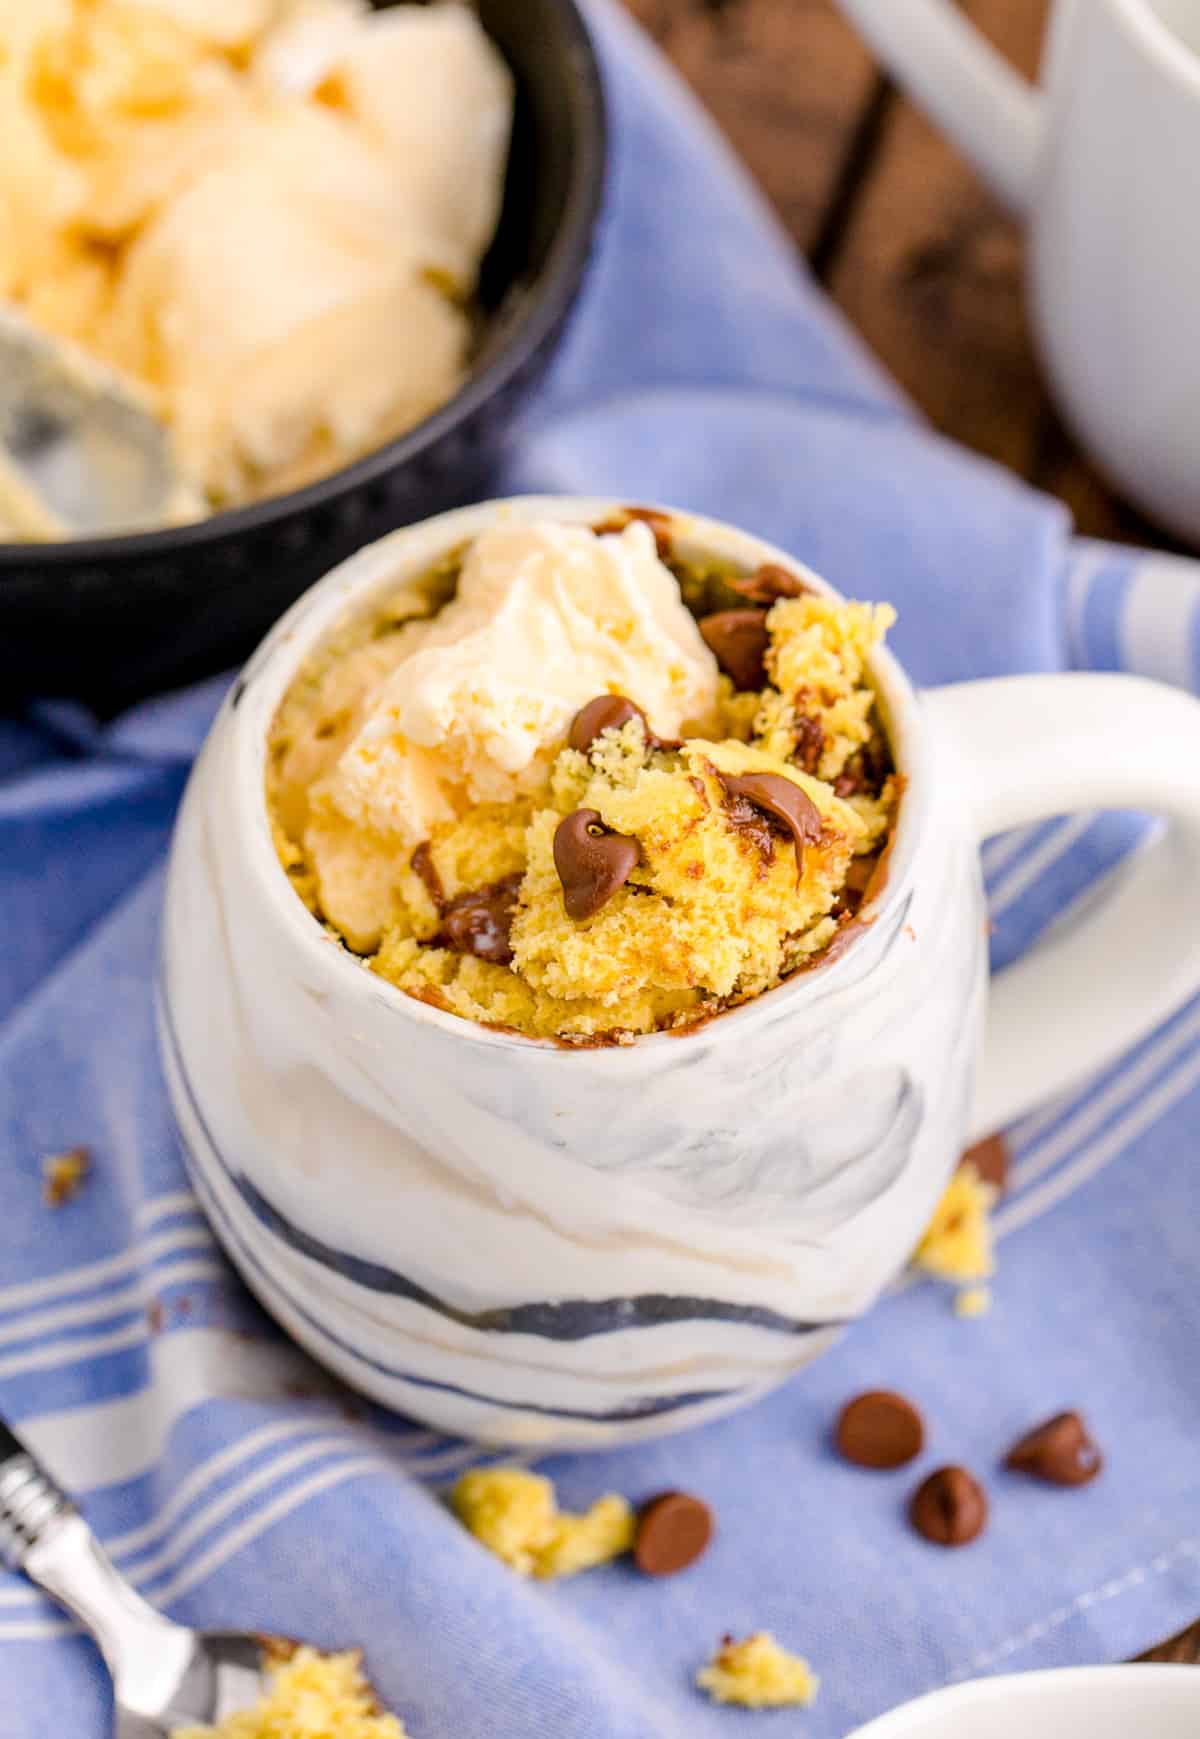 Chocolate Chip Mug Cake with ice cream added to mug on blue linen with ice cream in background surrounded by chocolate chips.